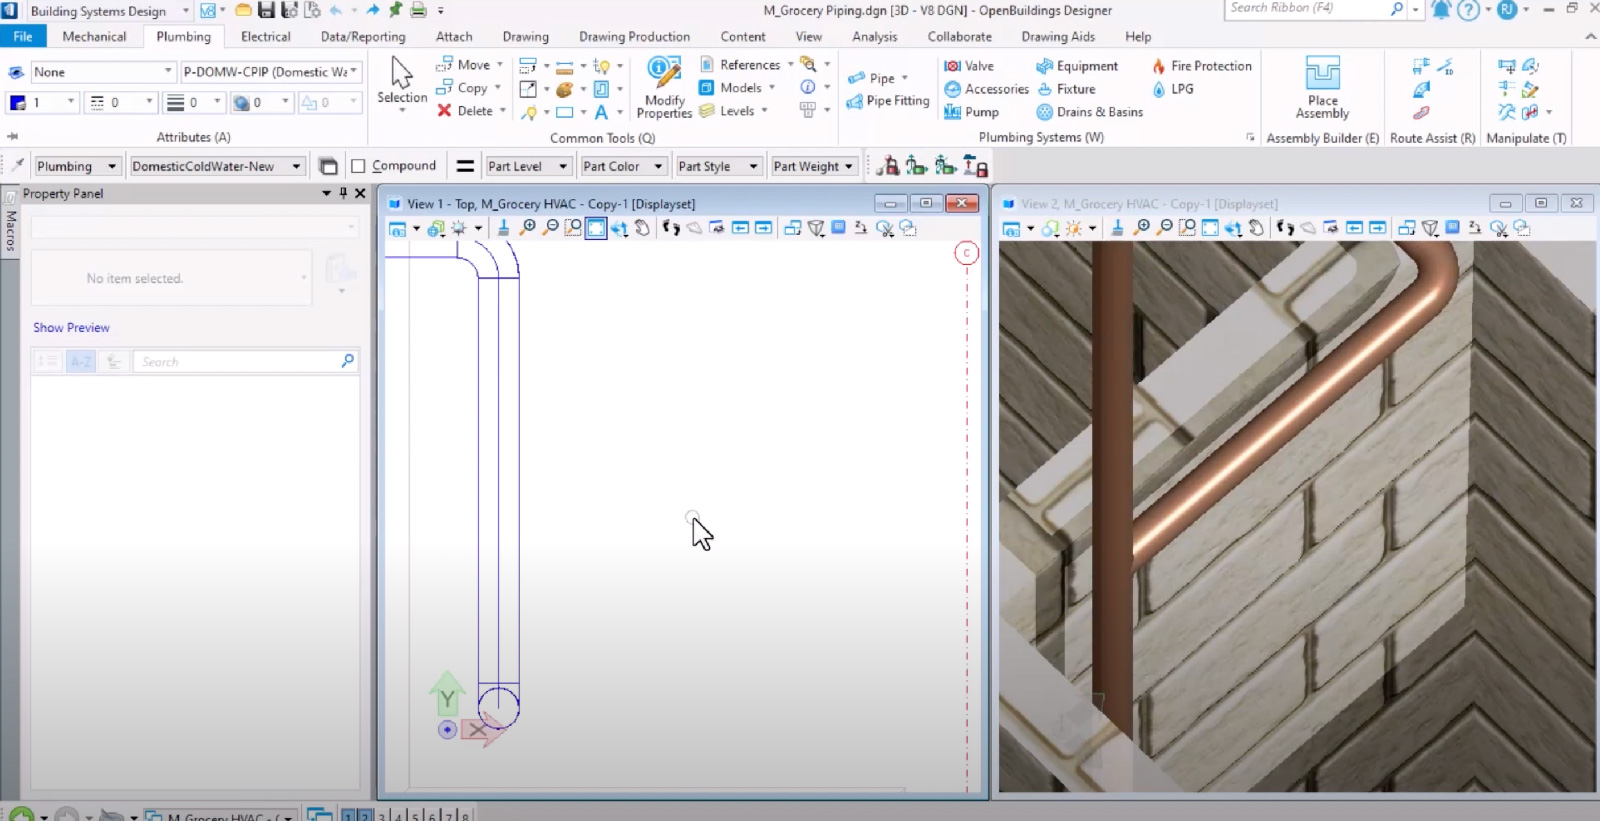 Screenshot view of autofitting preferences for plumbing in OpenBuildings Designer